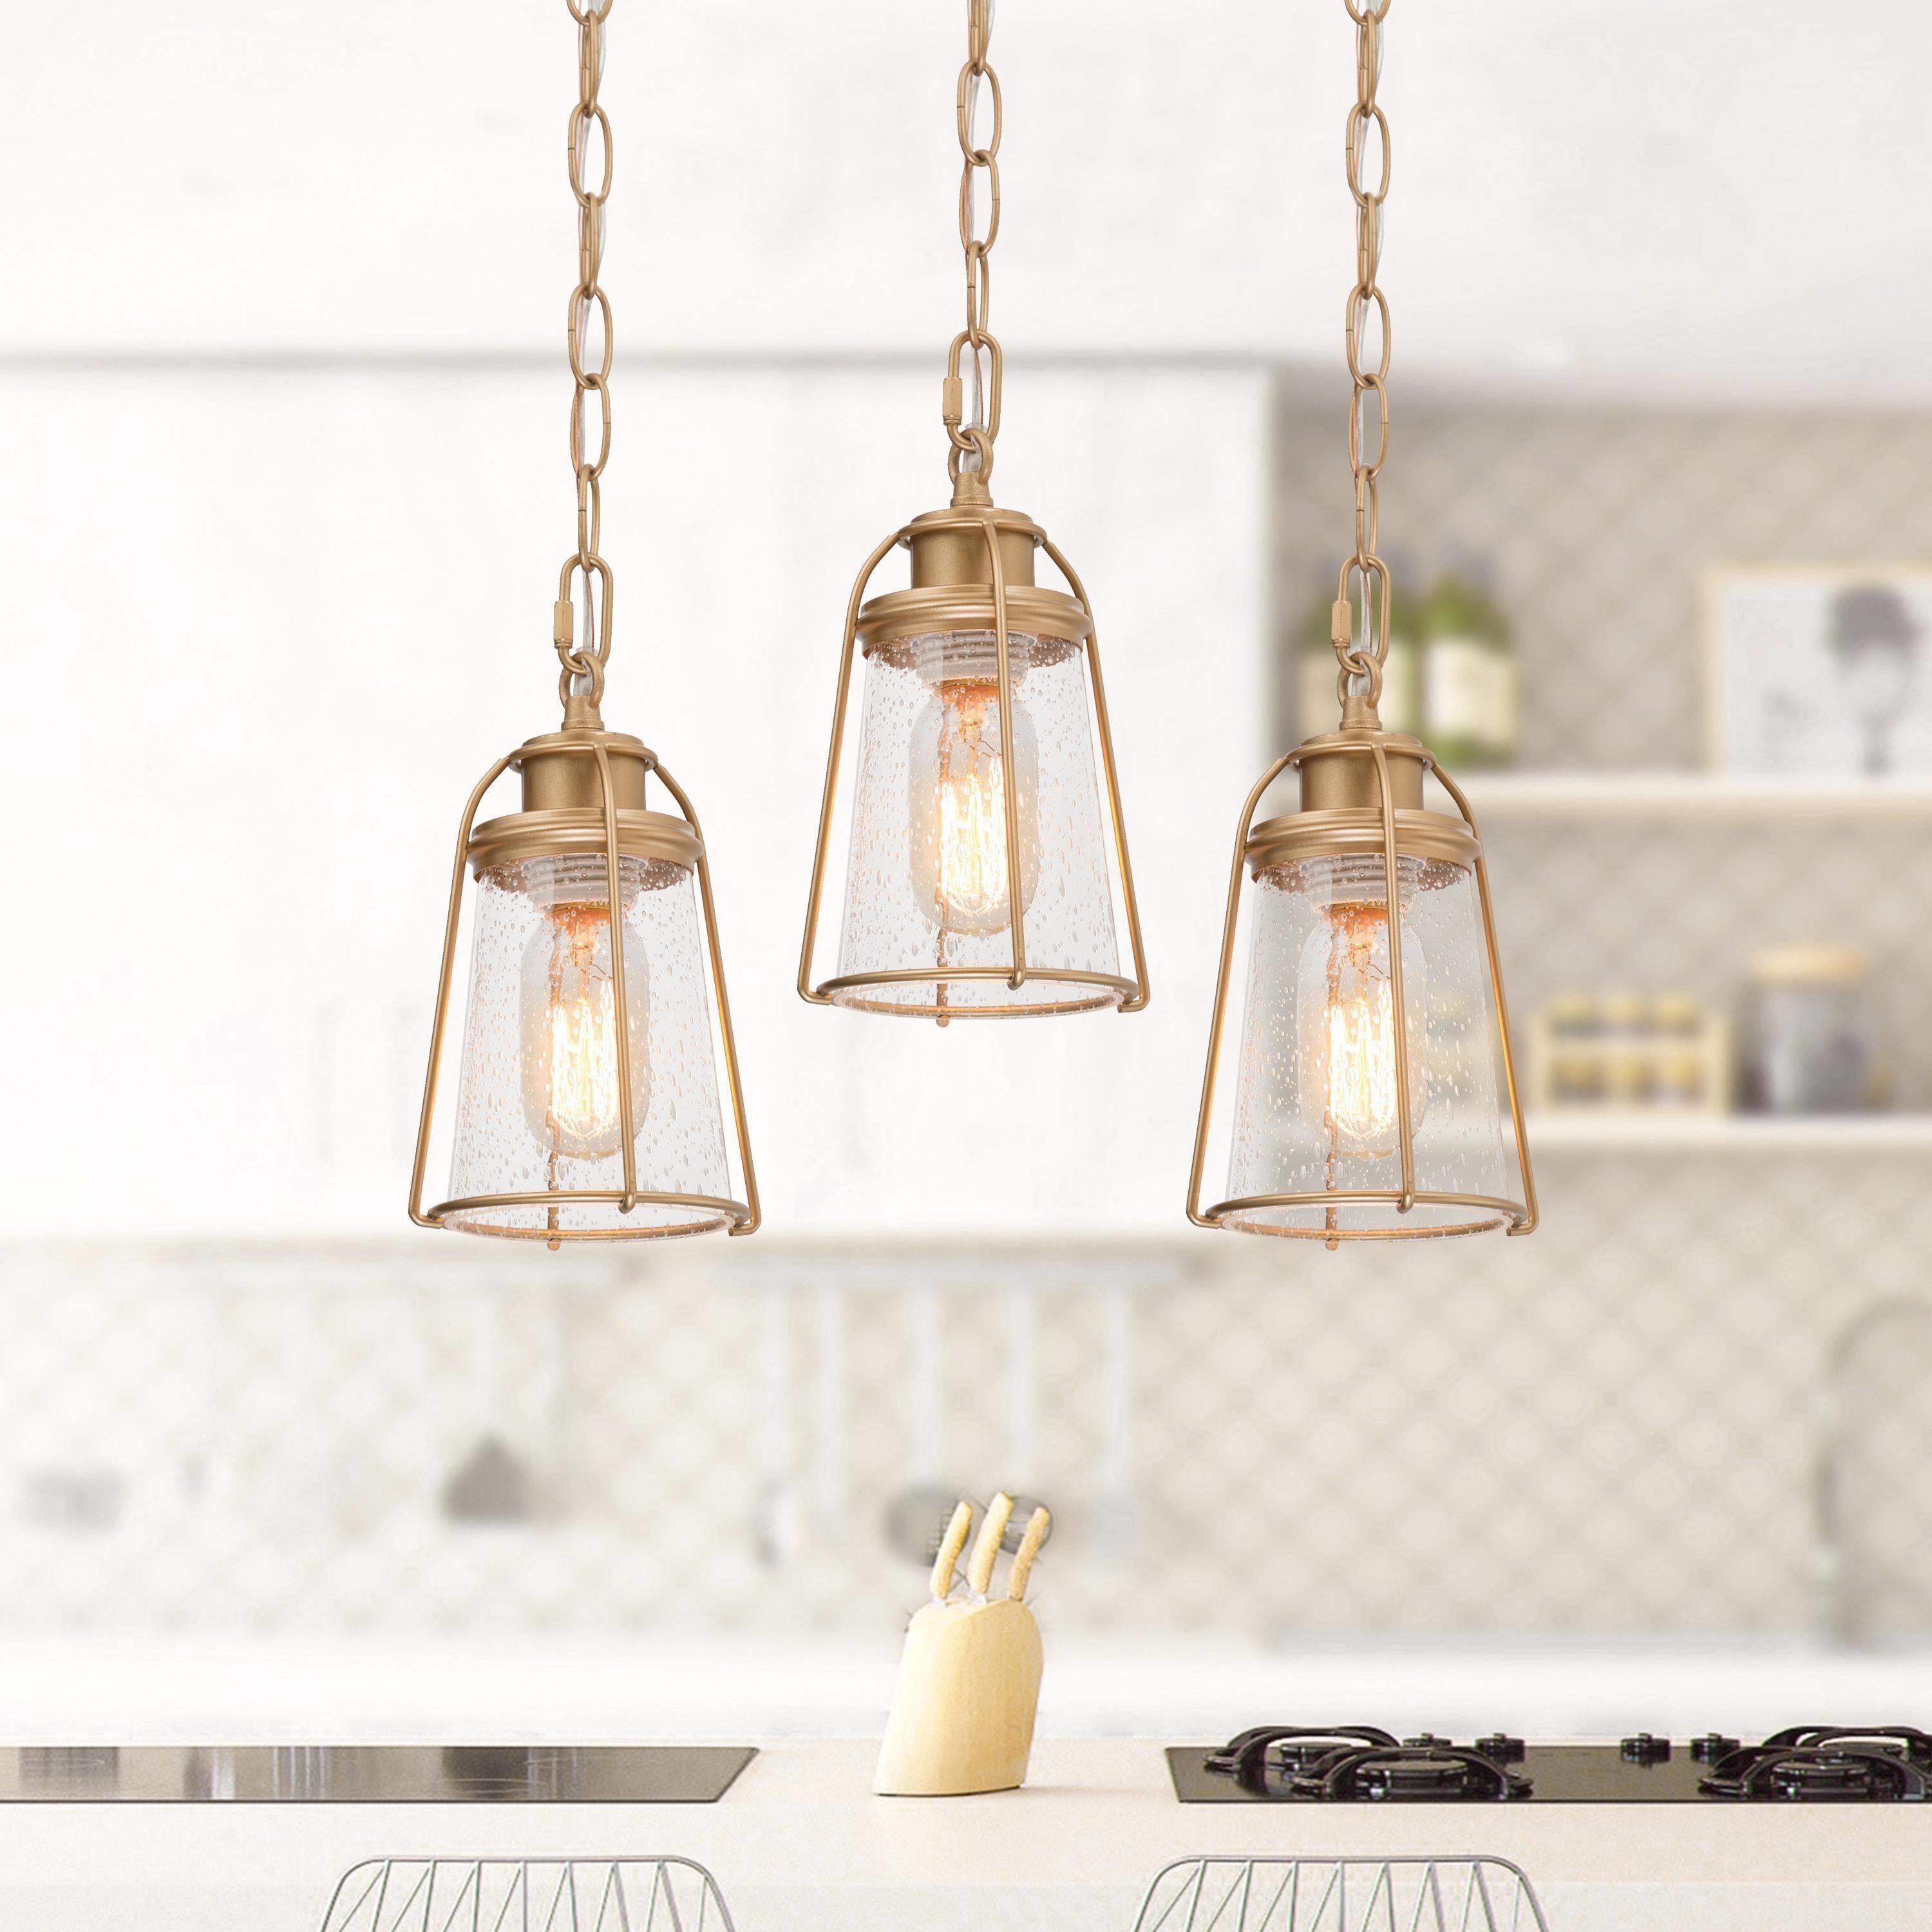 Lighting Island Glass Shade Seeded Hanging Modern/Contemporary the Kitchen Pendant and in Lantern Glass Seeded Gold Light LED department Uolfin Mini Matte at